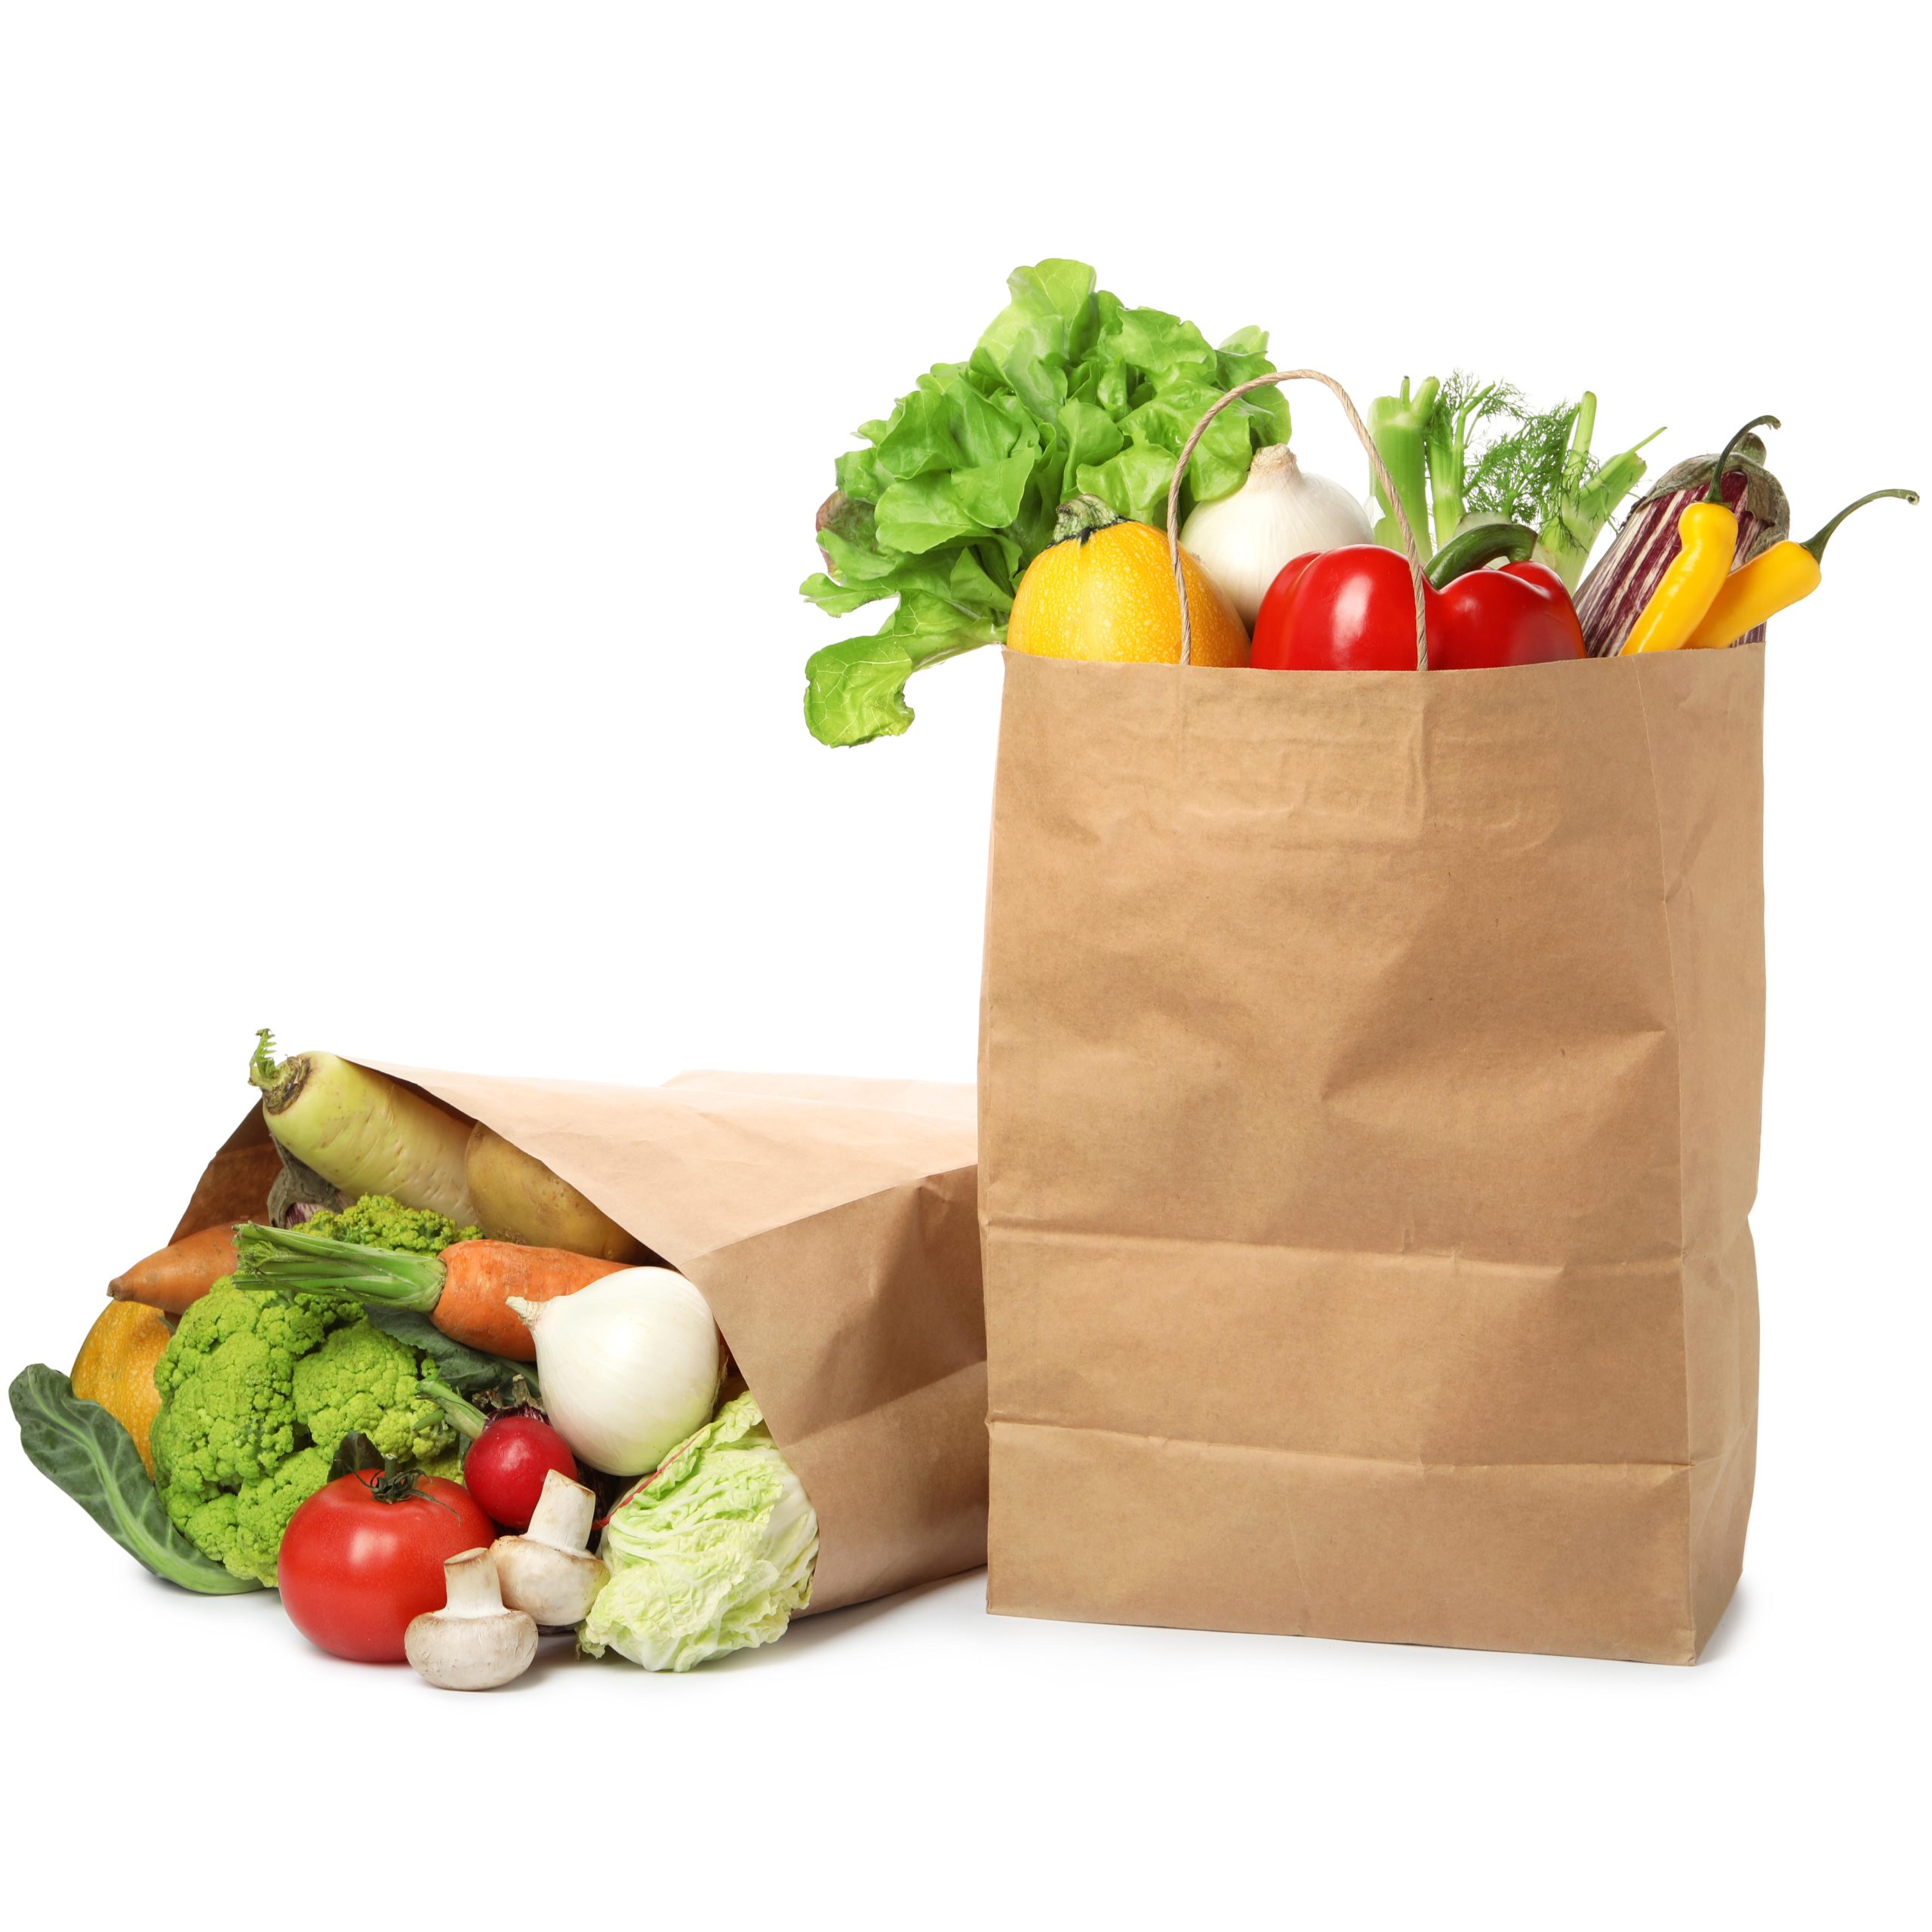 Home Delivery Service Packaging Paper Bags